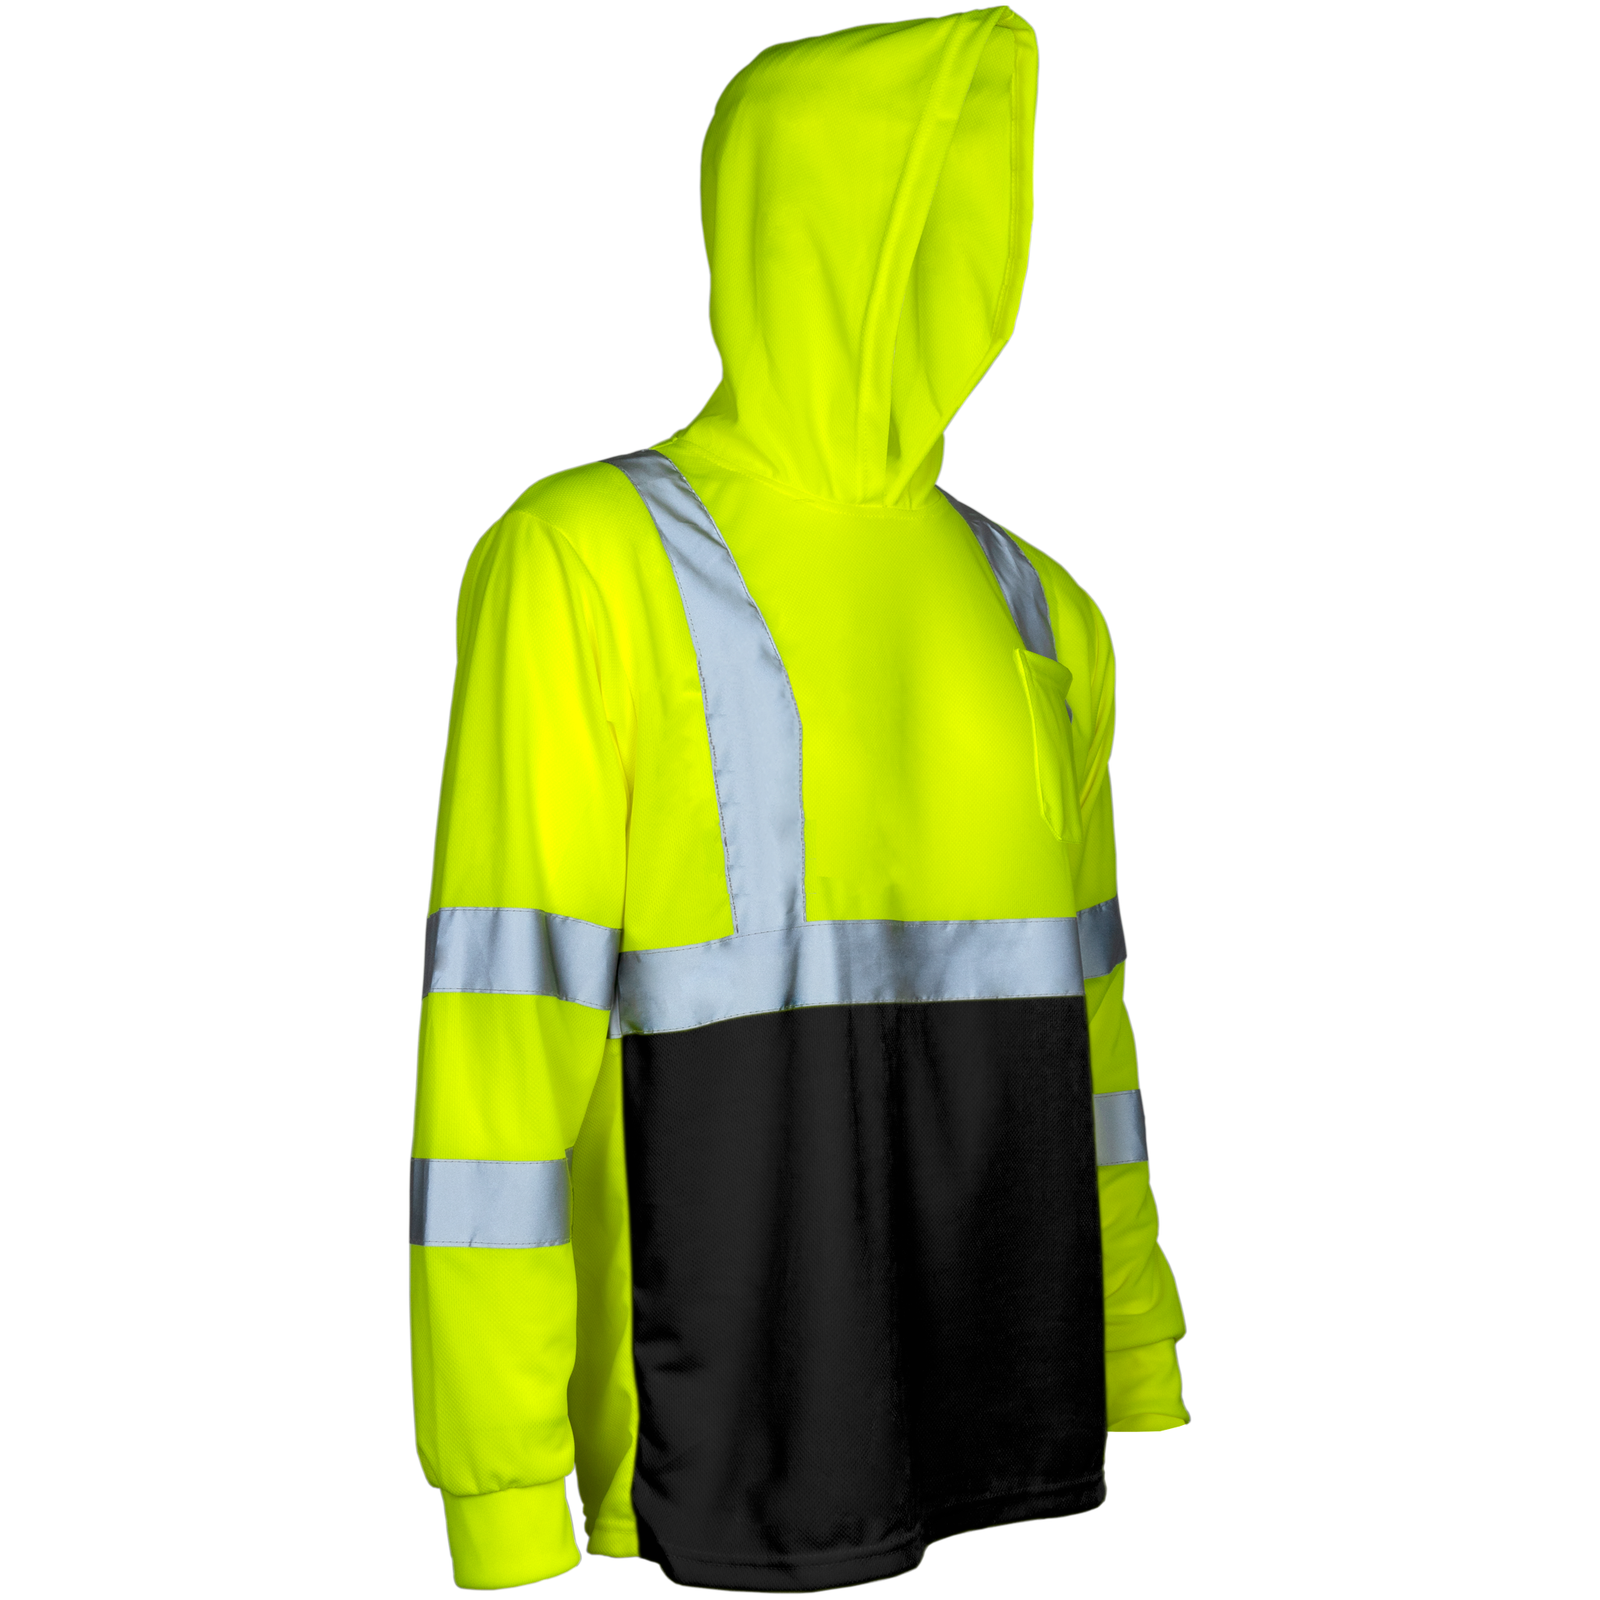 Long Sleeve Safety Shirt With Reflective Strips and Hoodie